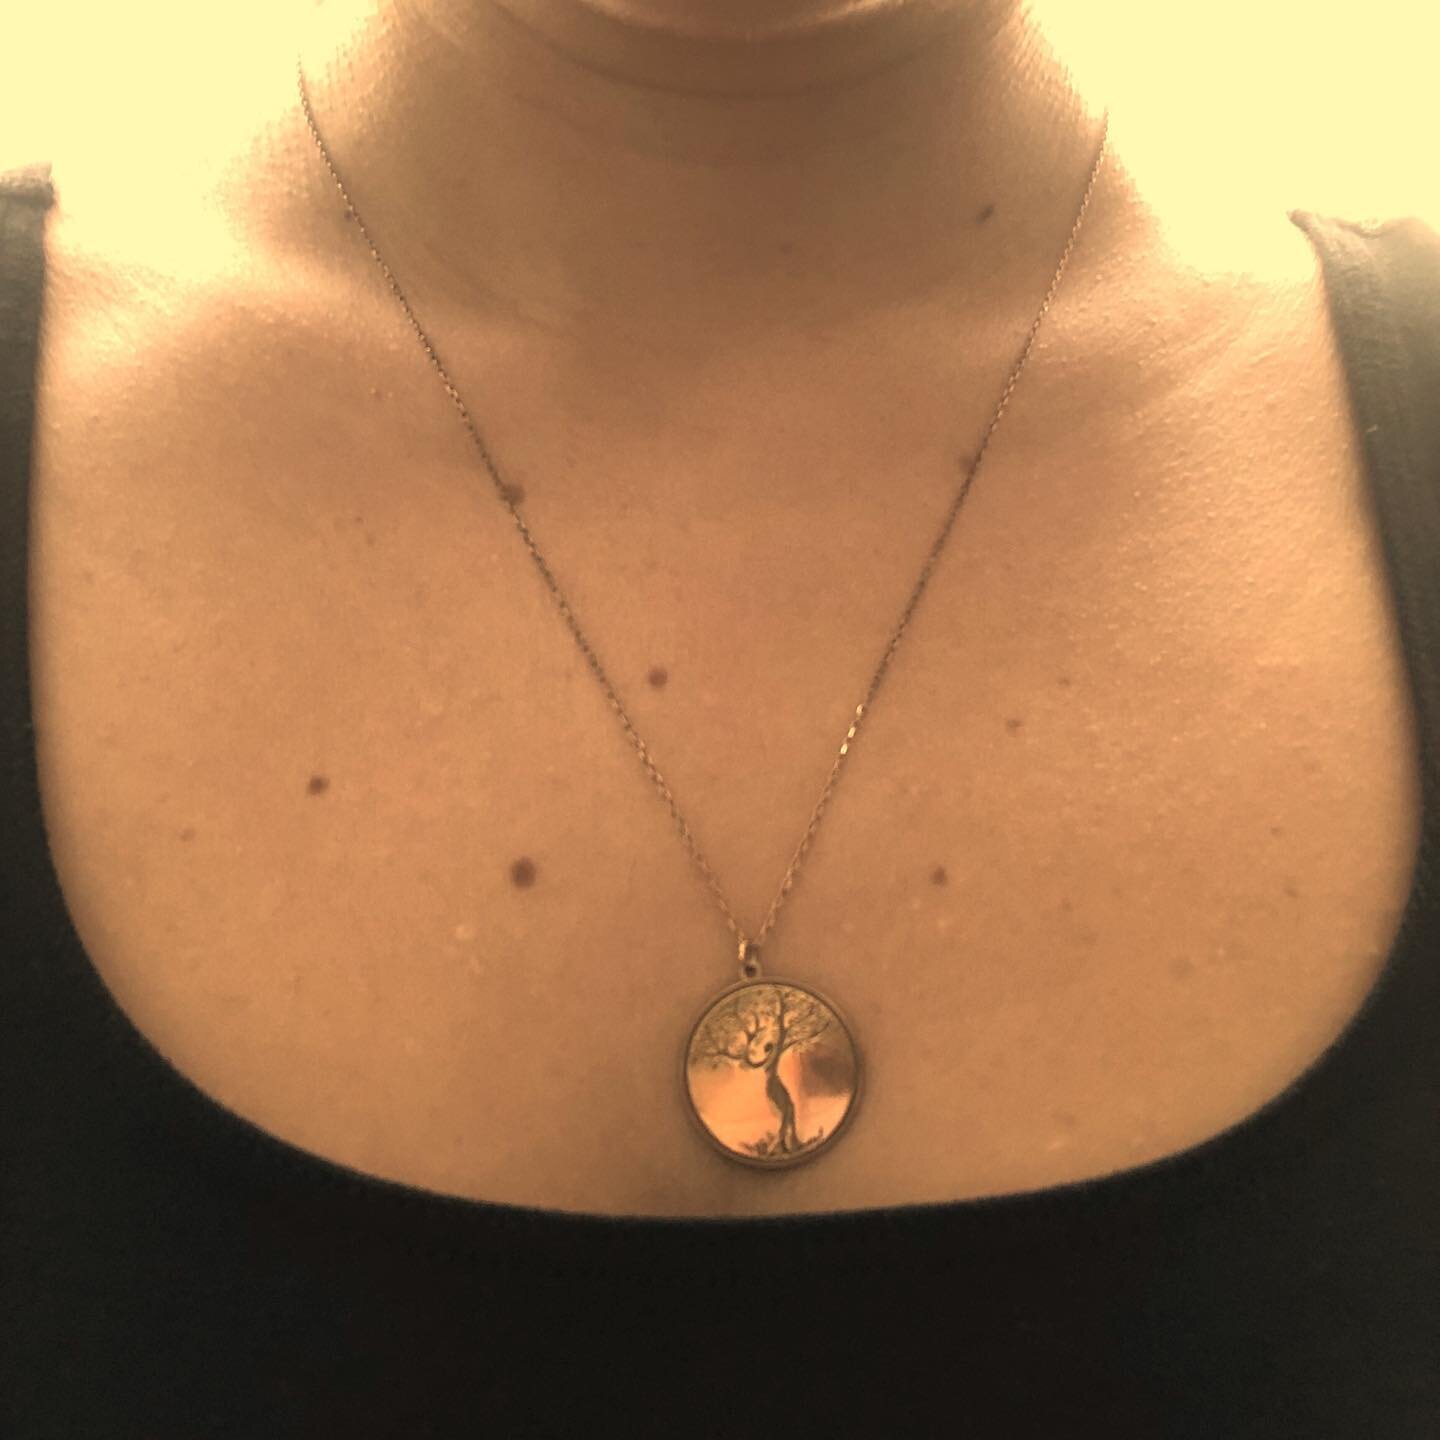 One of the mothers I worked with gave me a thank you present, a necklace with a Mother Tree. ✨ Mother trees are in the forests and are very old. They are like central hubs that connect new seeds and young trees. They welcome many living beings. They 